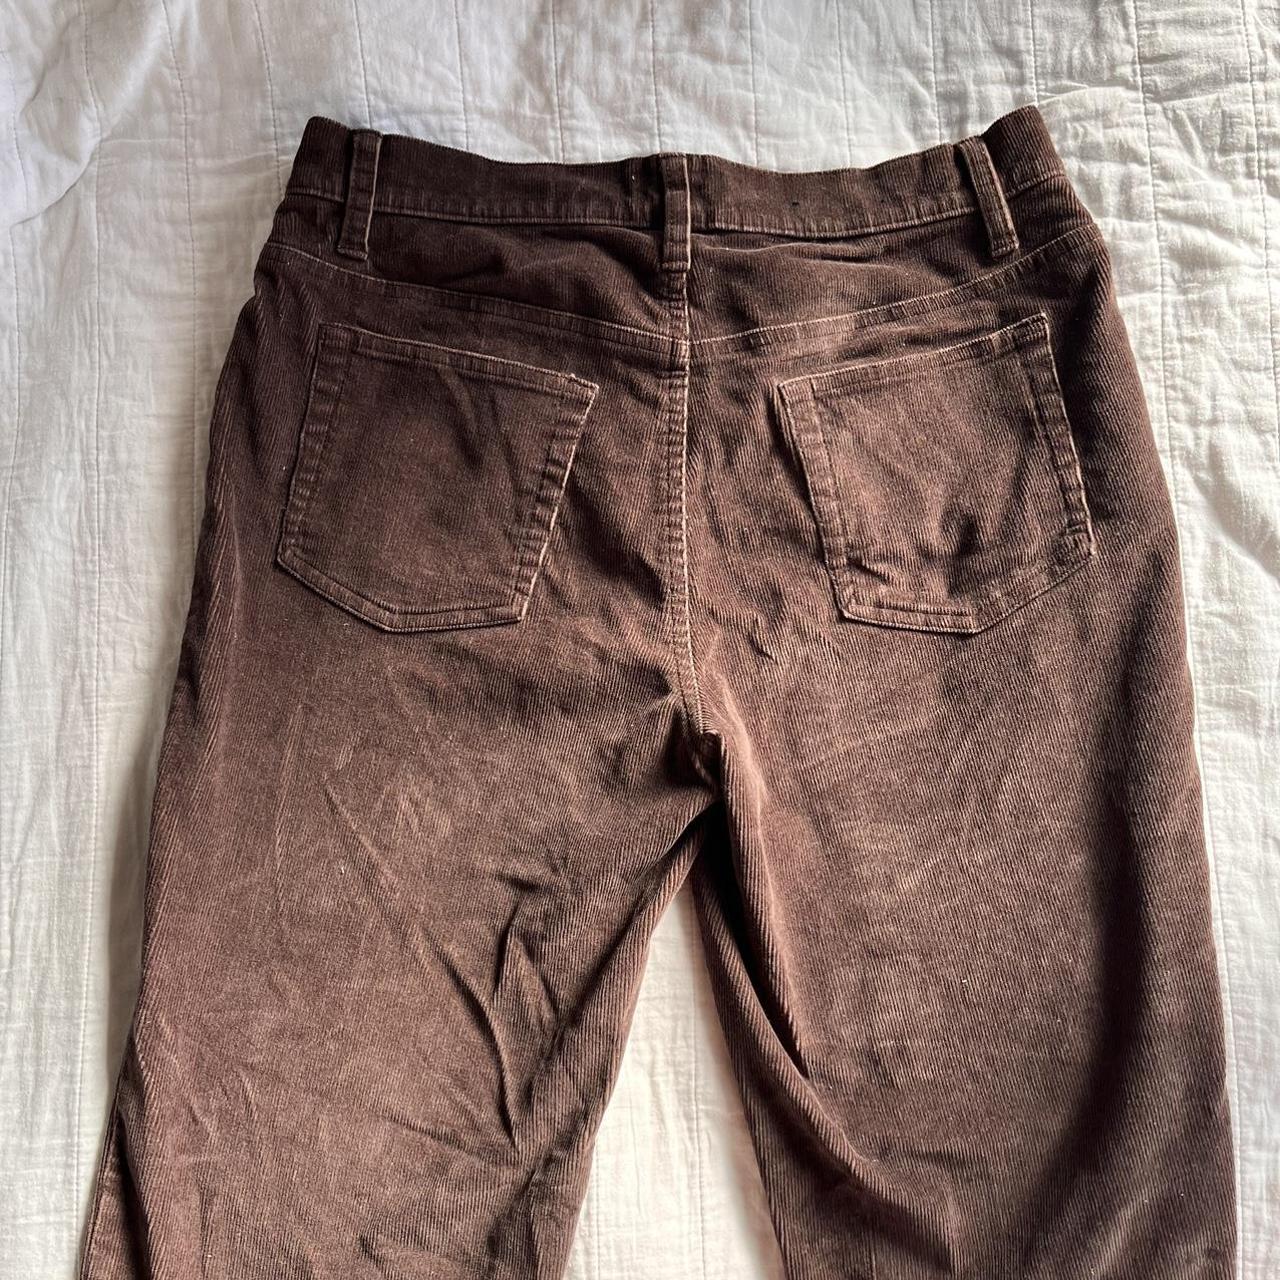 Aランク 40's Vintage French Corduroy Trousers - 通販 - www